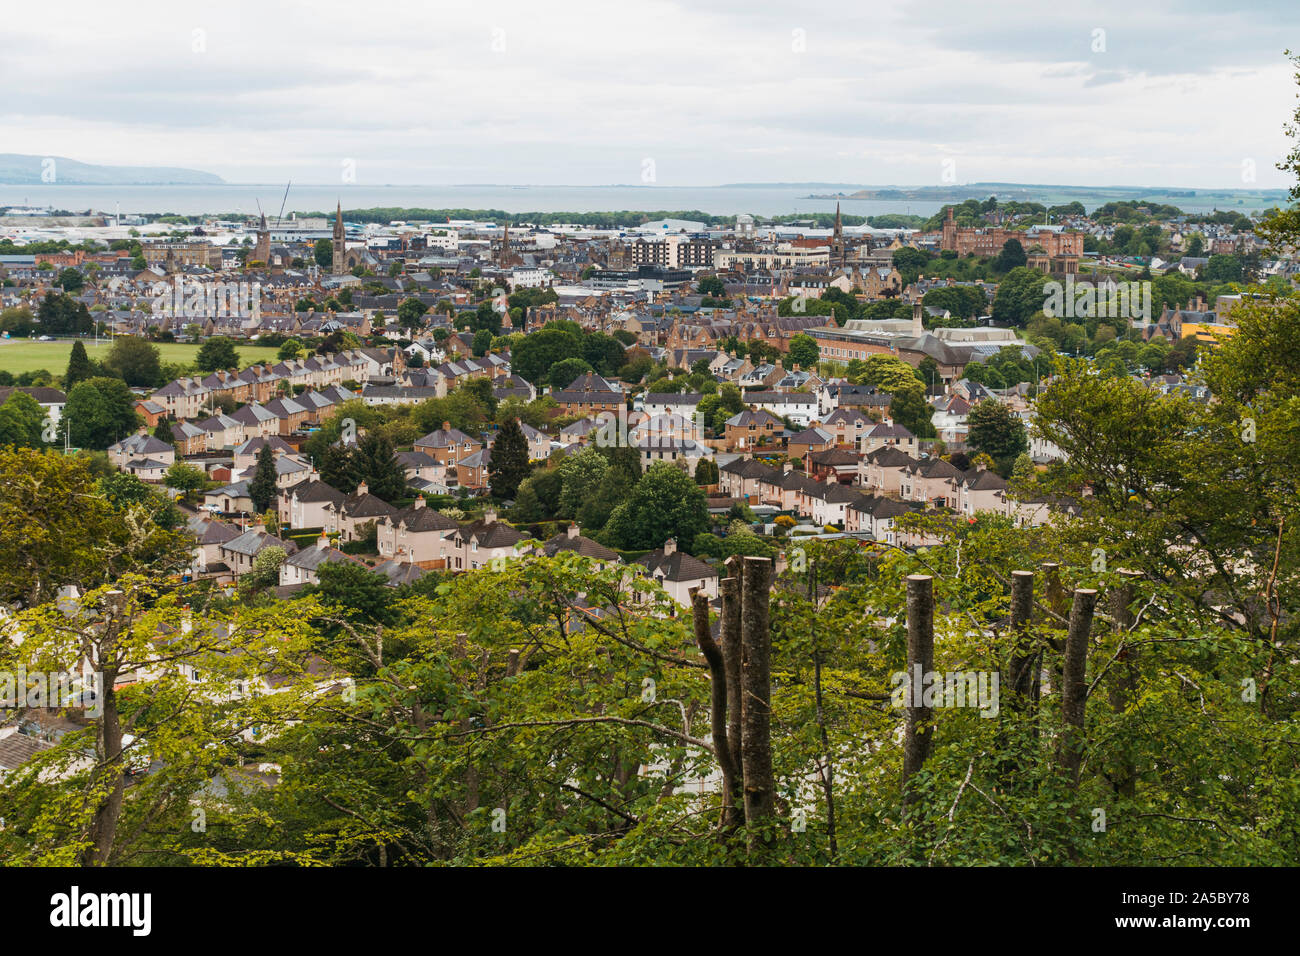 Looking out over the city of Inverness on a cloudy day from on top of Tomnahurich Cemetery Hill Stock Photo